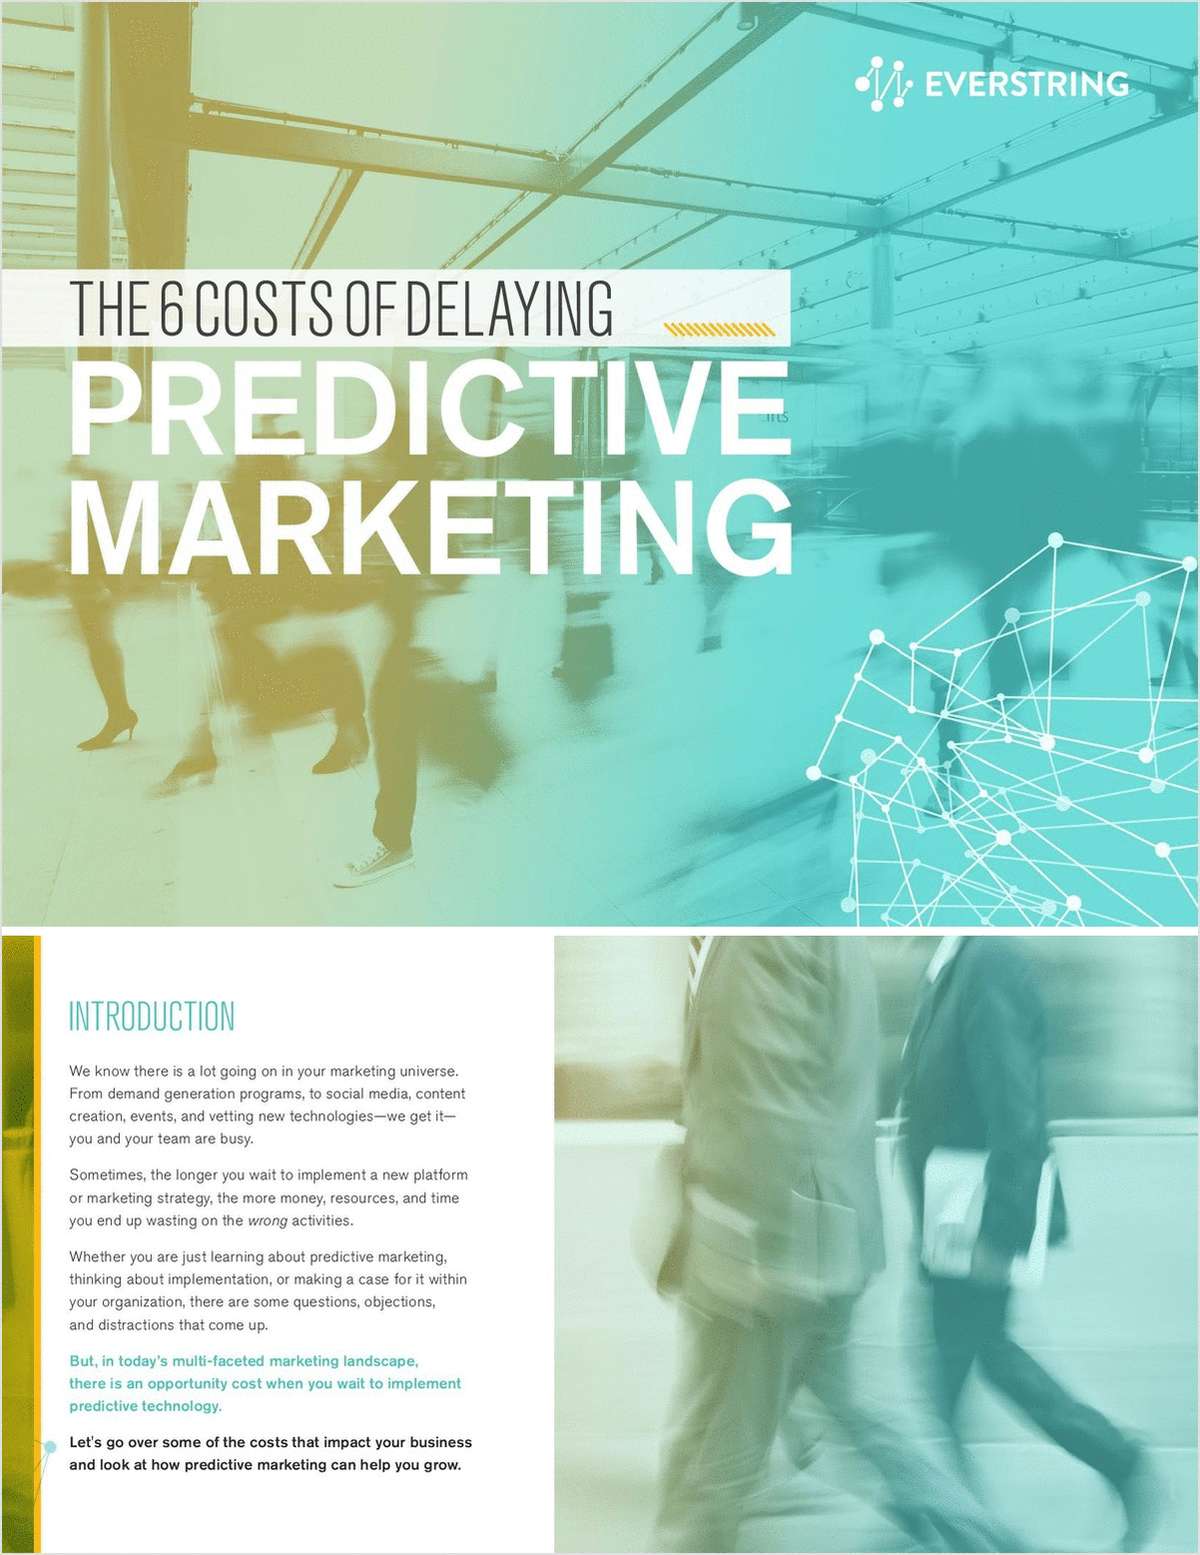 The 6 Costs of Delaying Predictive Marketing